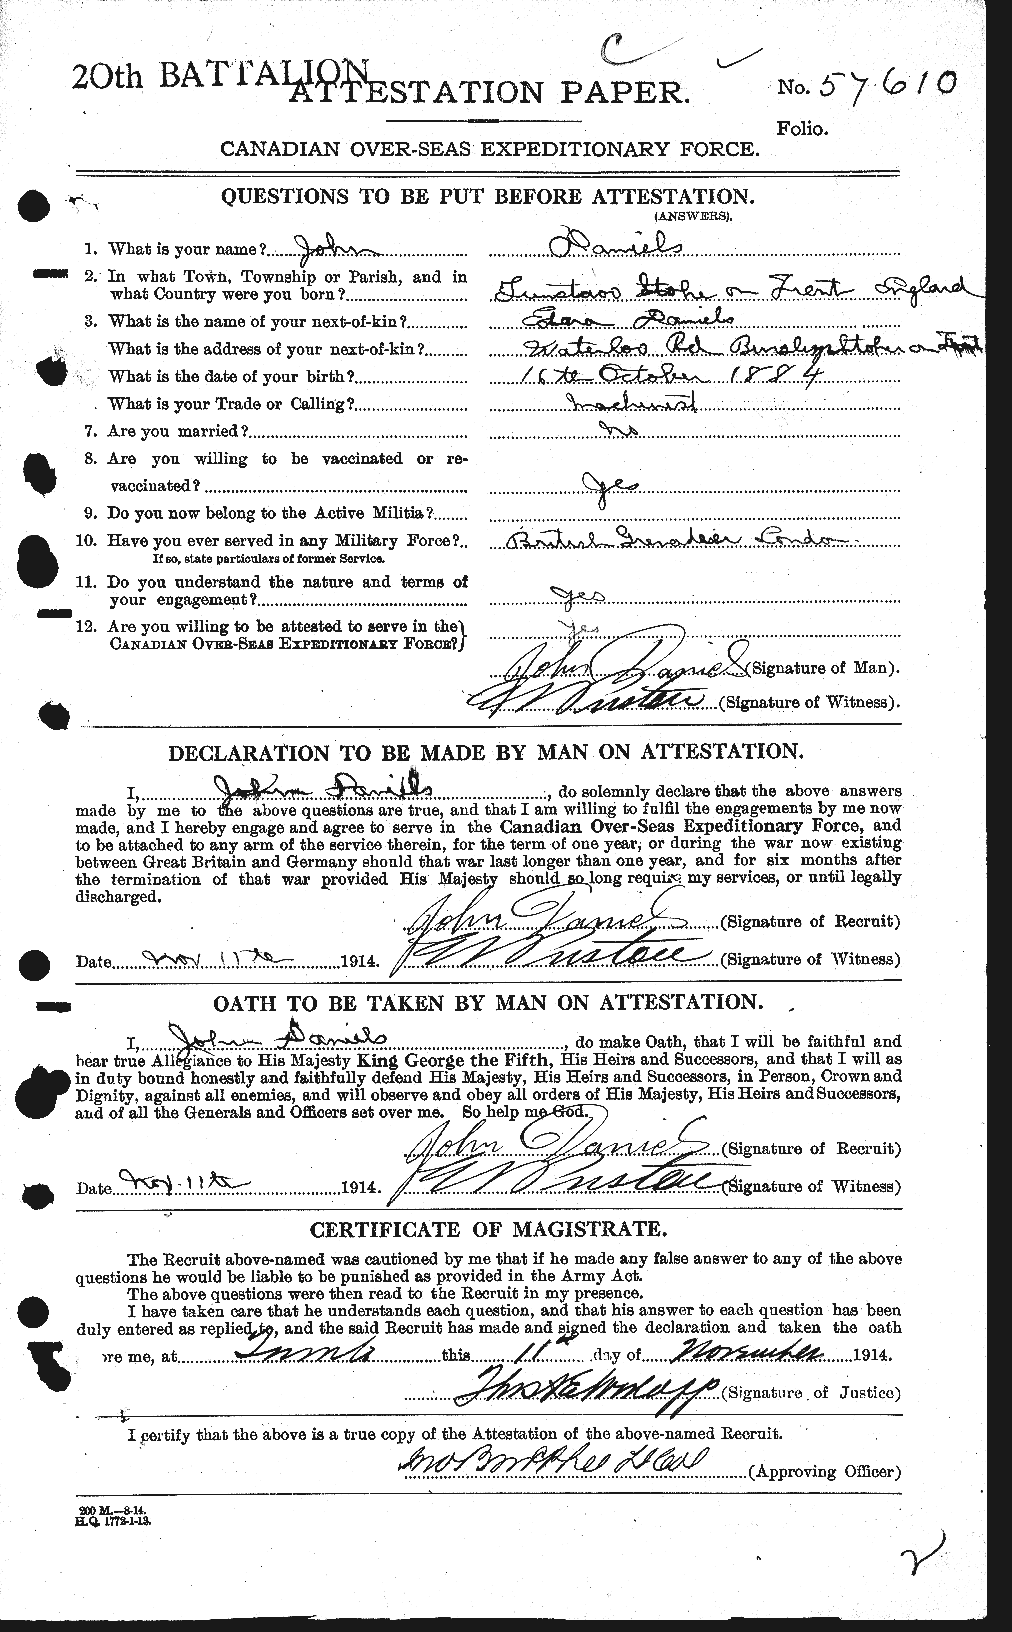 Personnel Records of the First World War - CEF 279639a